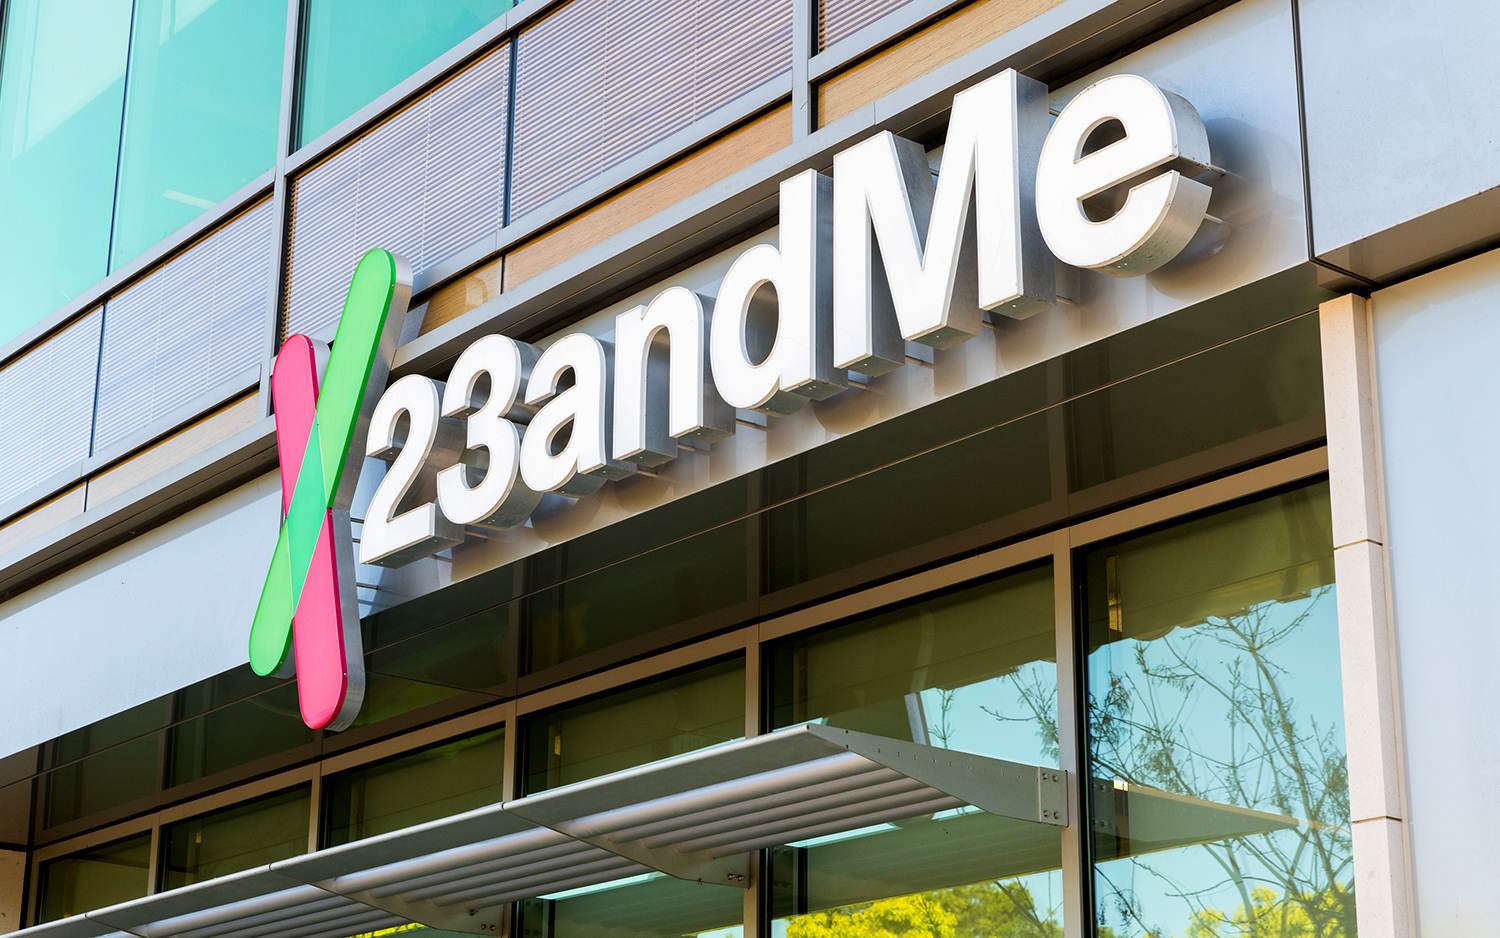 23andMe Data Breach: What You Need to Know